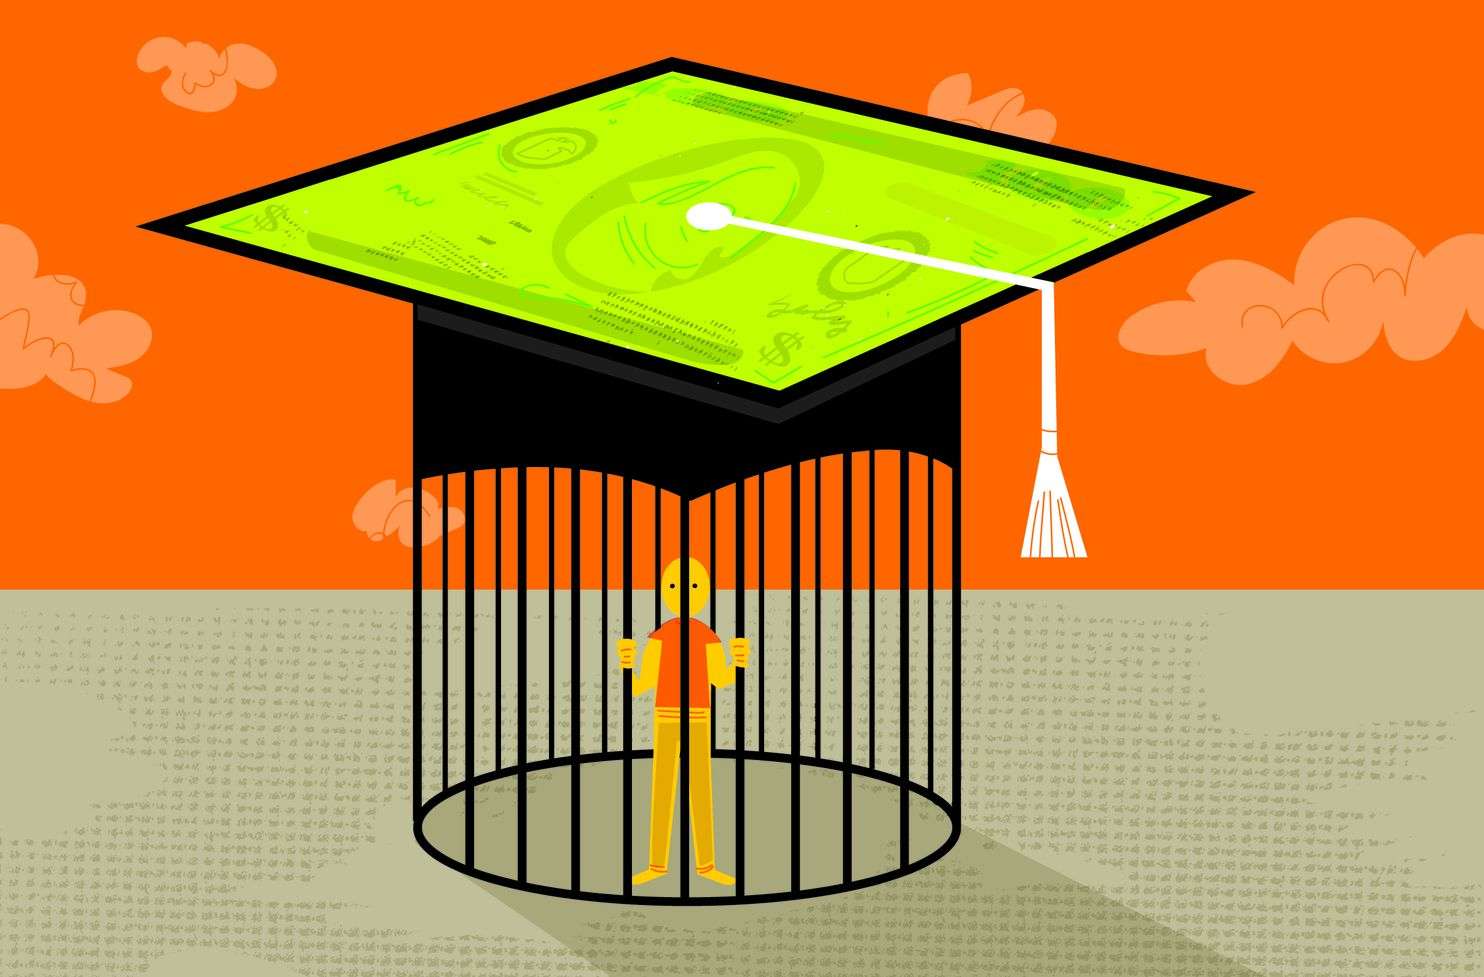 Is college worth it? One professor says no.